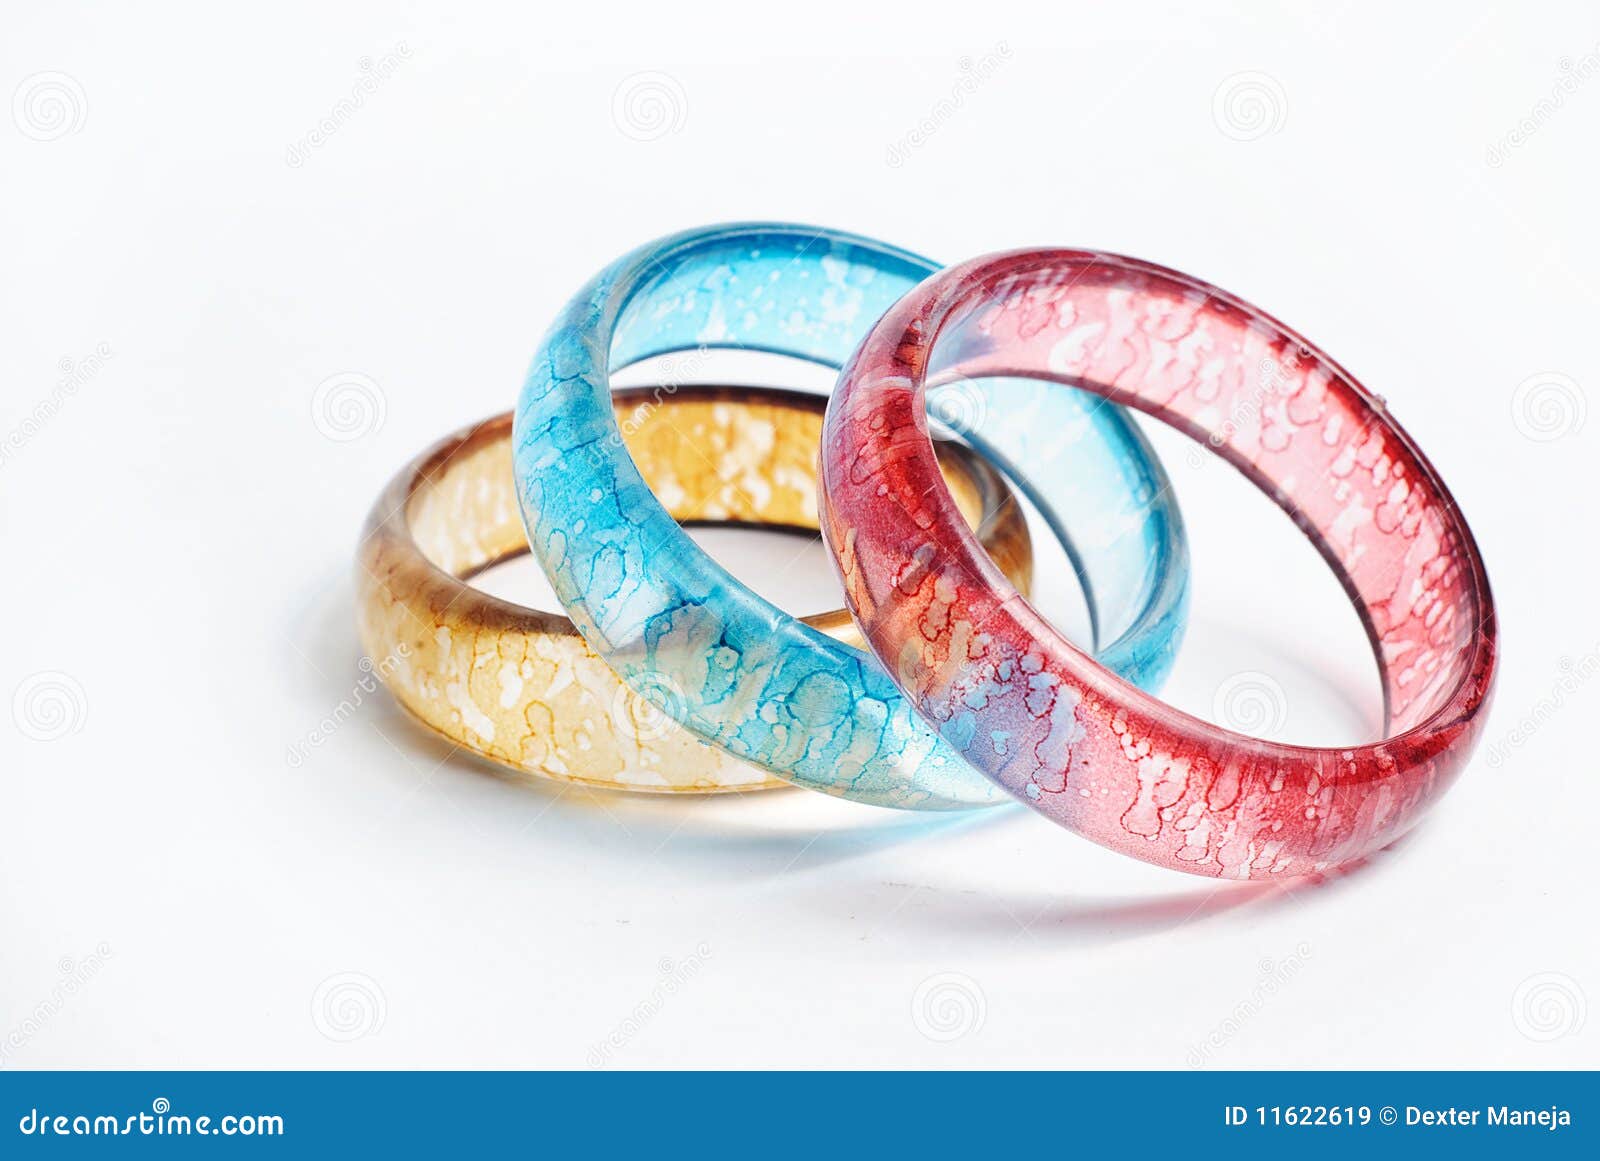 Bangles stock image. Image of bright, color, jewellery - 11622619